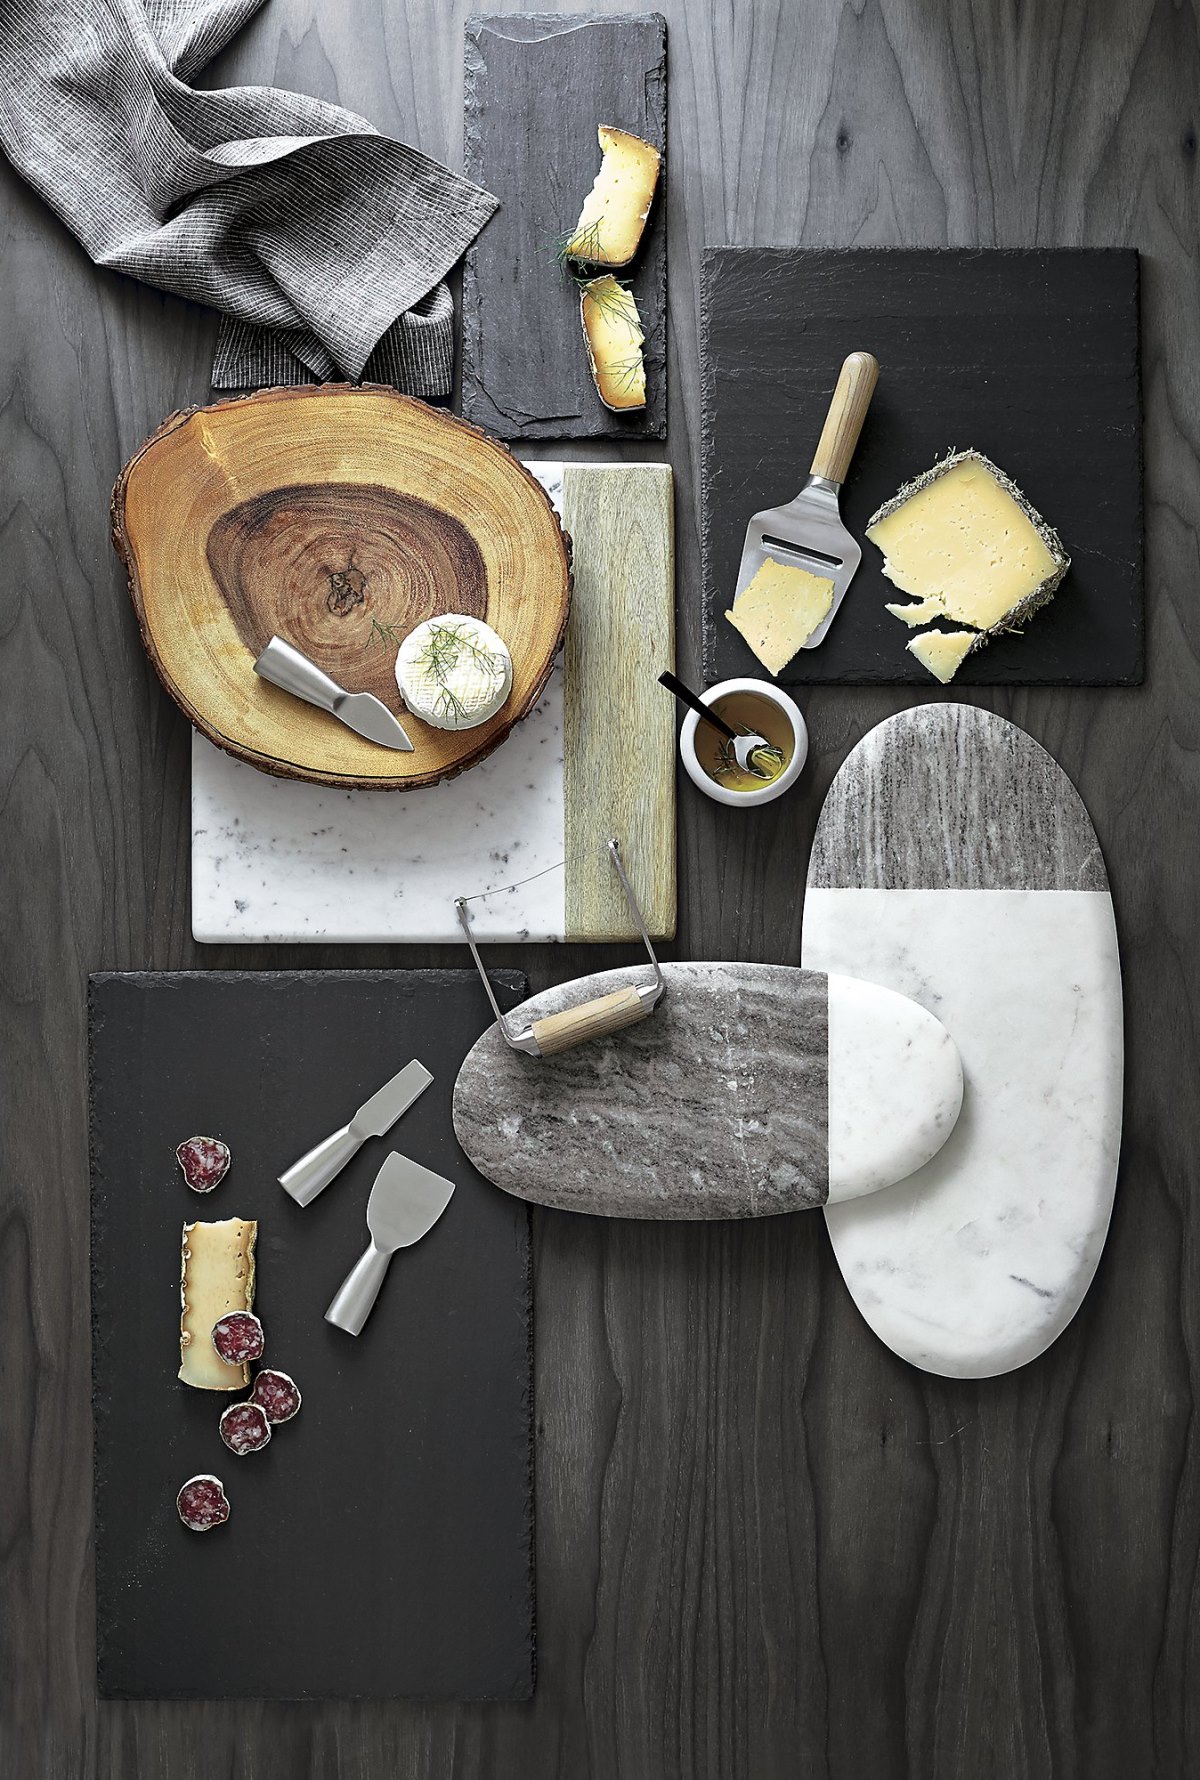 Cheese boards from Crate & Barrel